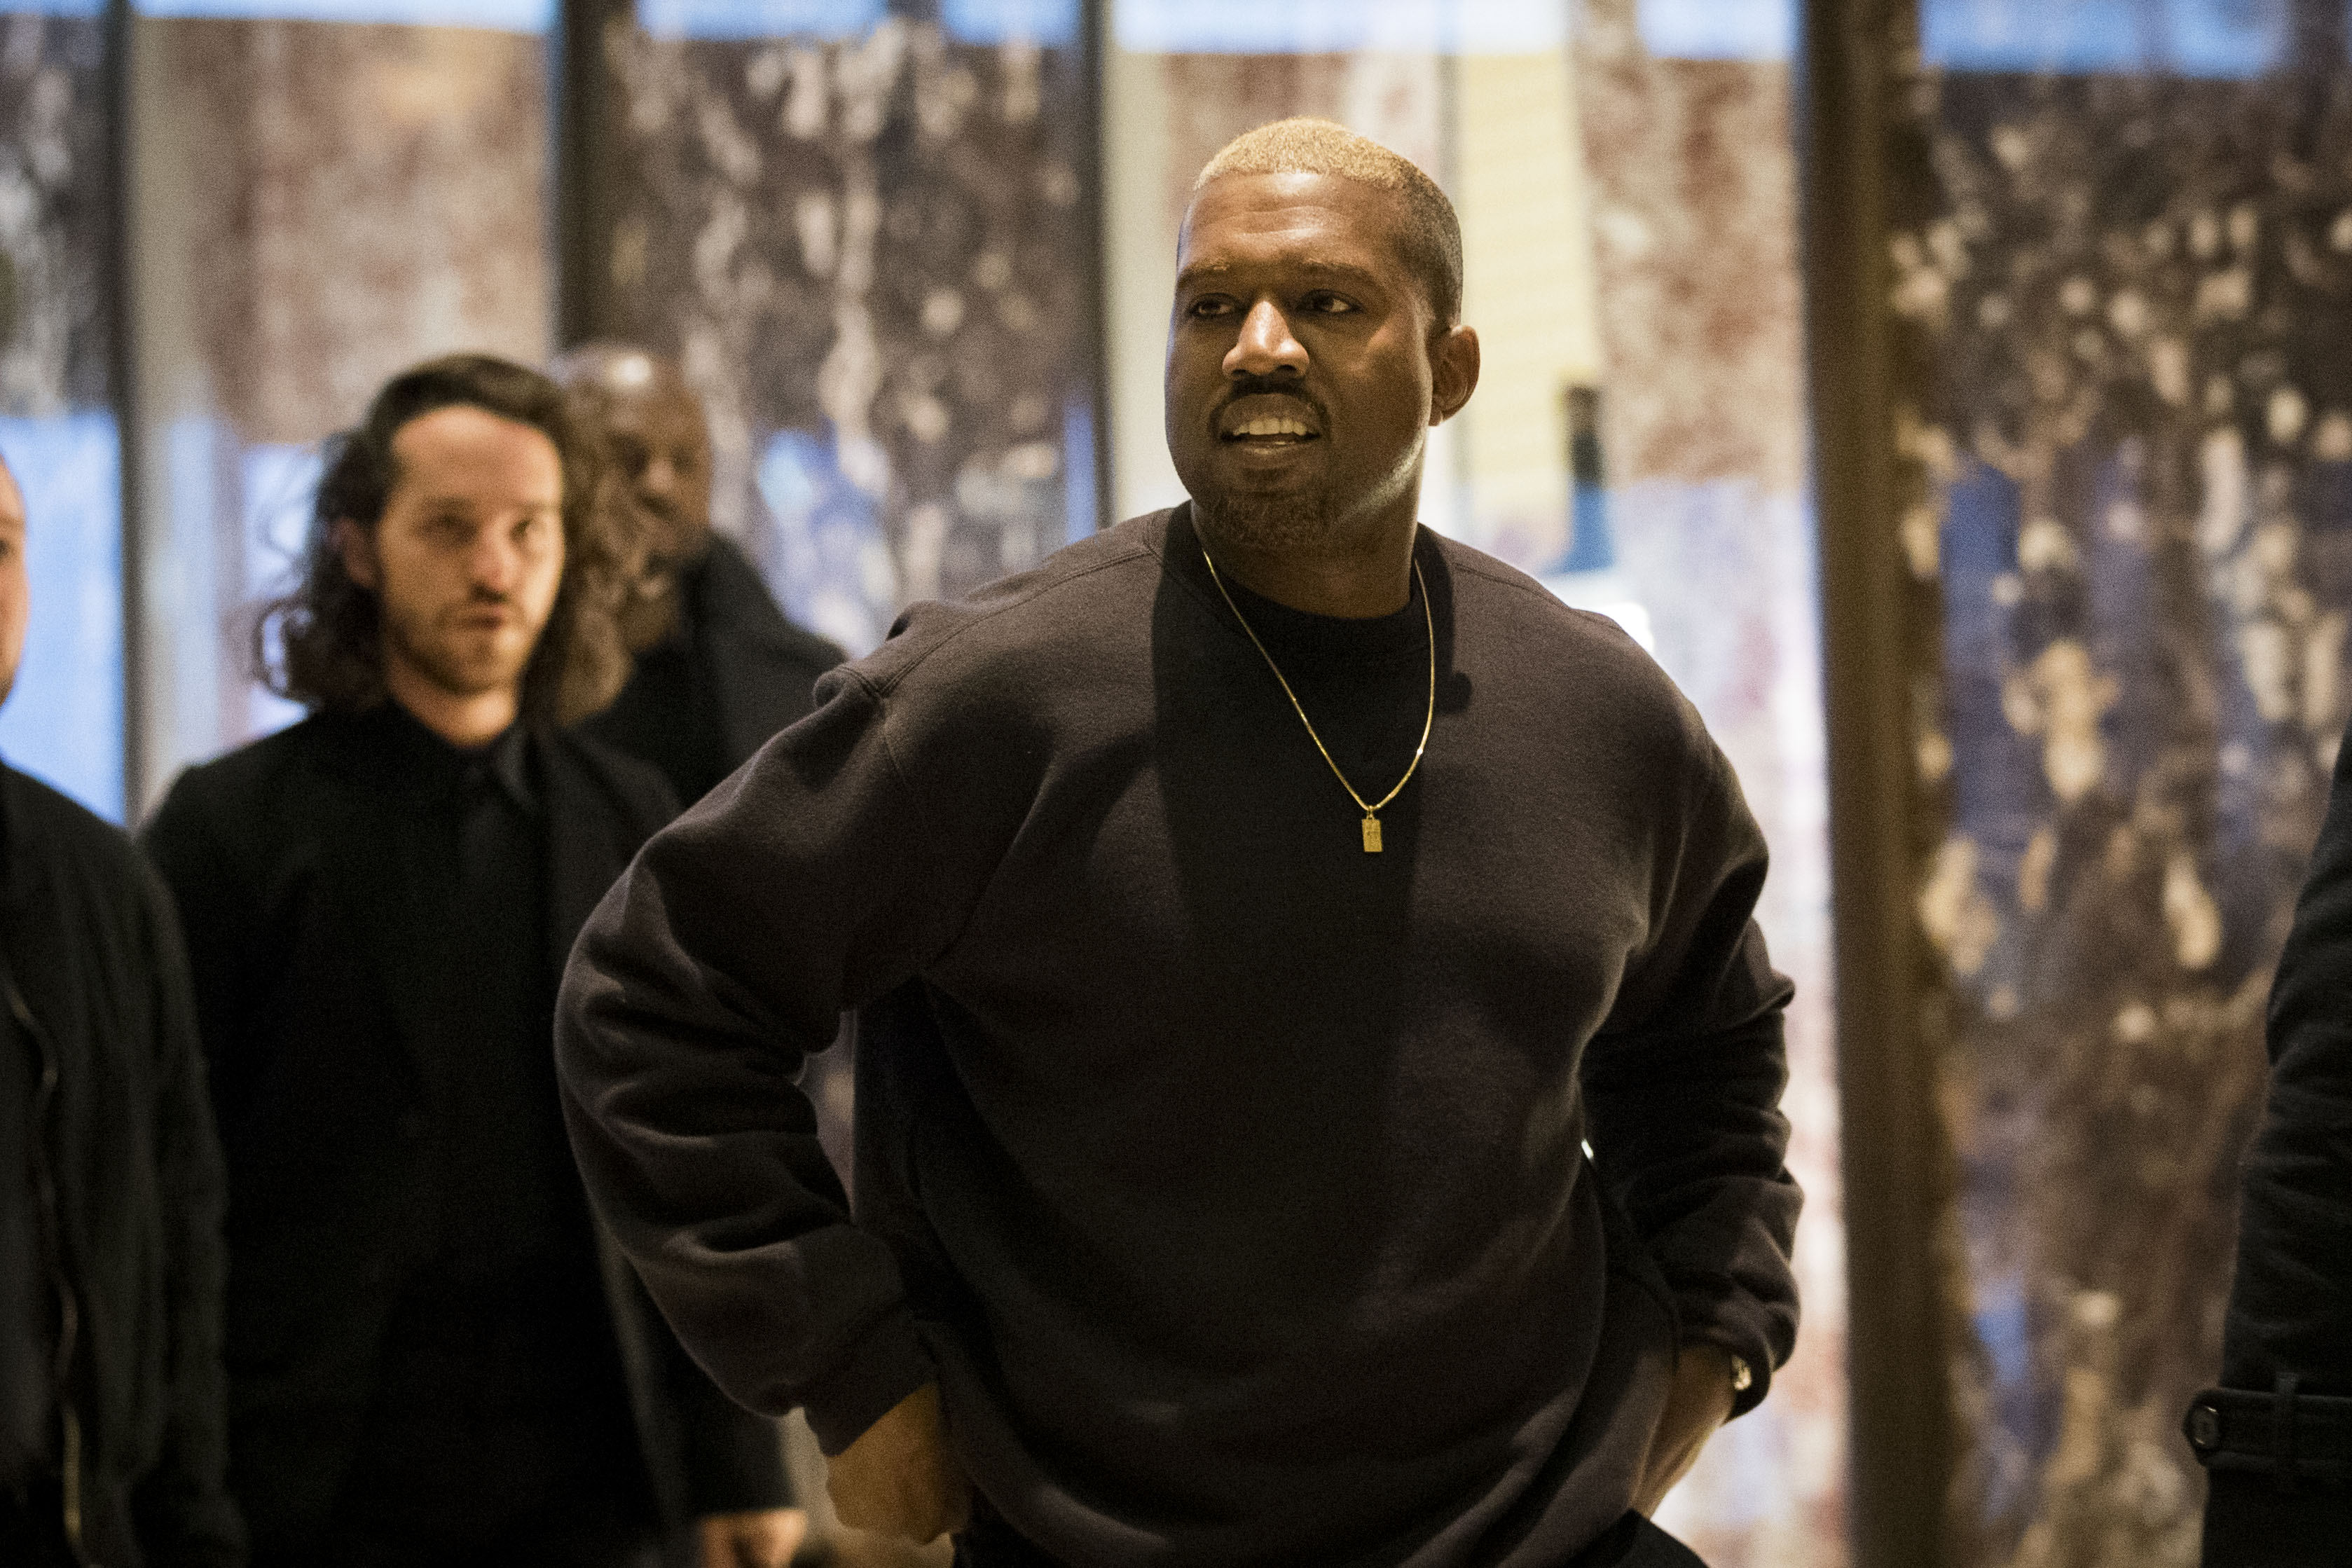 Kanye West arrives at Trump Tower, Dec. 13, 2016 in New York City. (Drew Angerer—Getty Images)